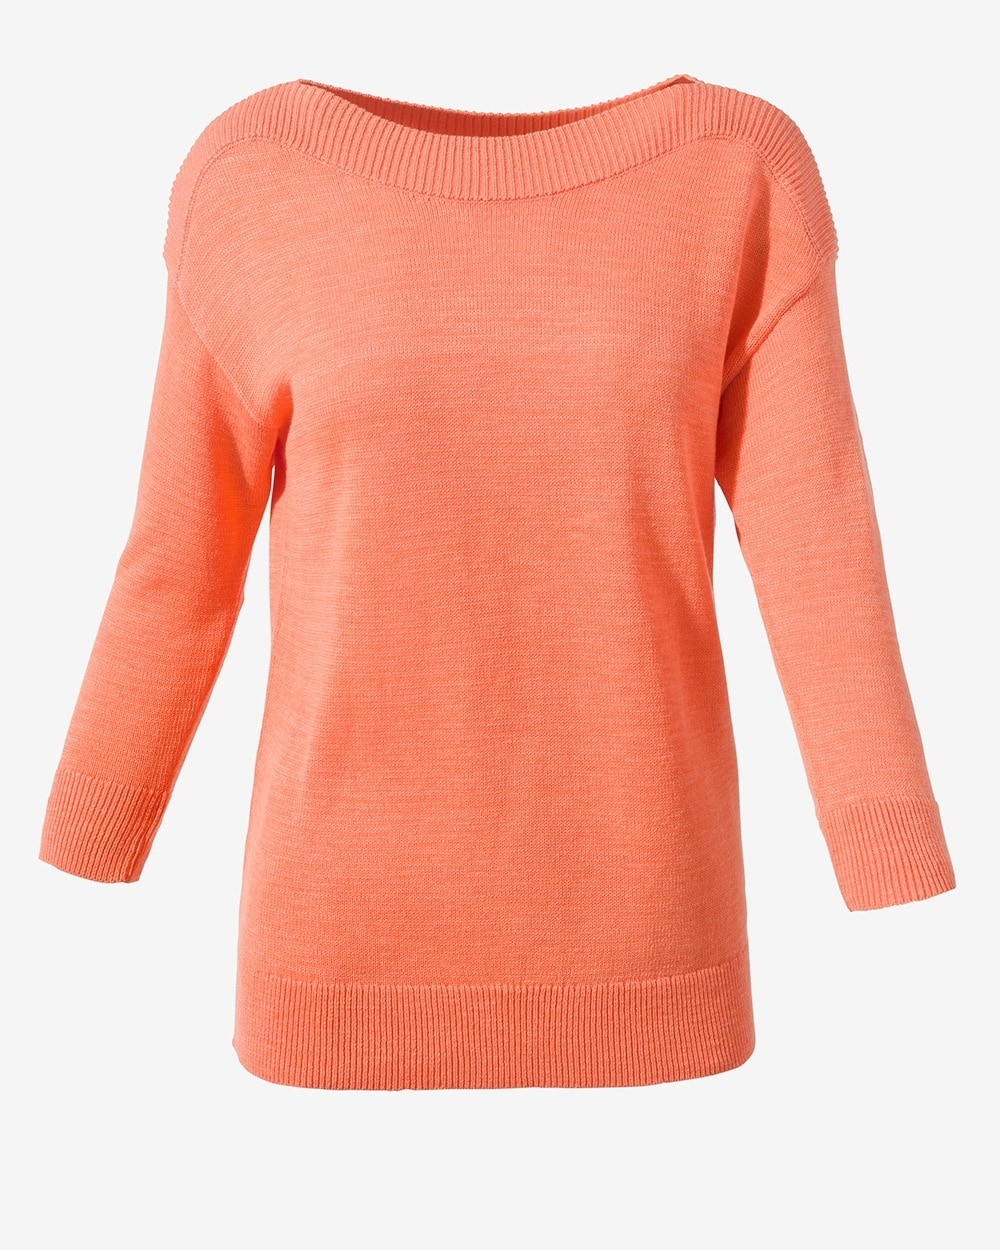 Ribbed Boat-Neck 3/4-Sleeve Sweater